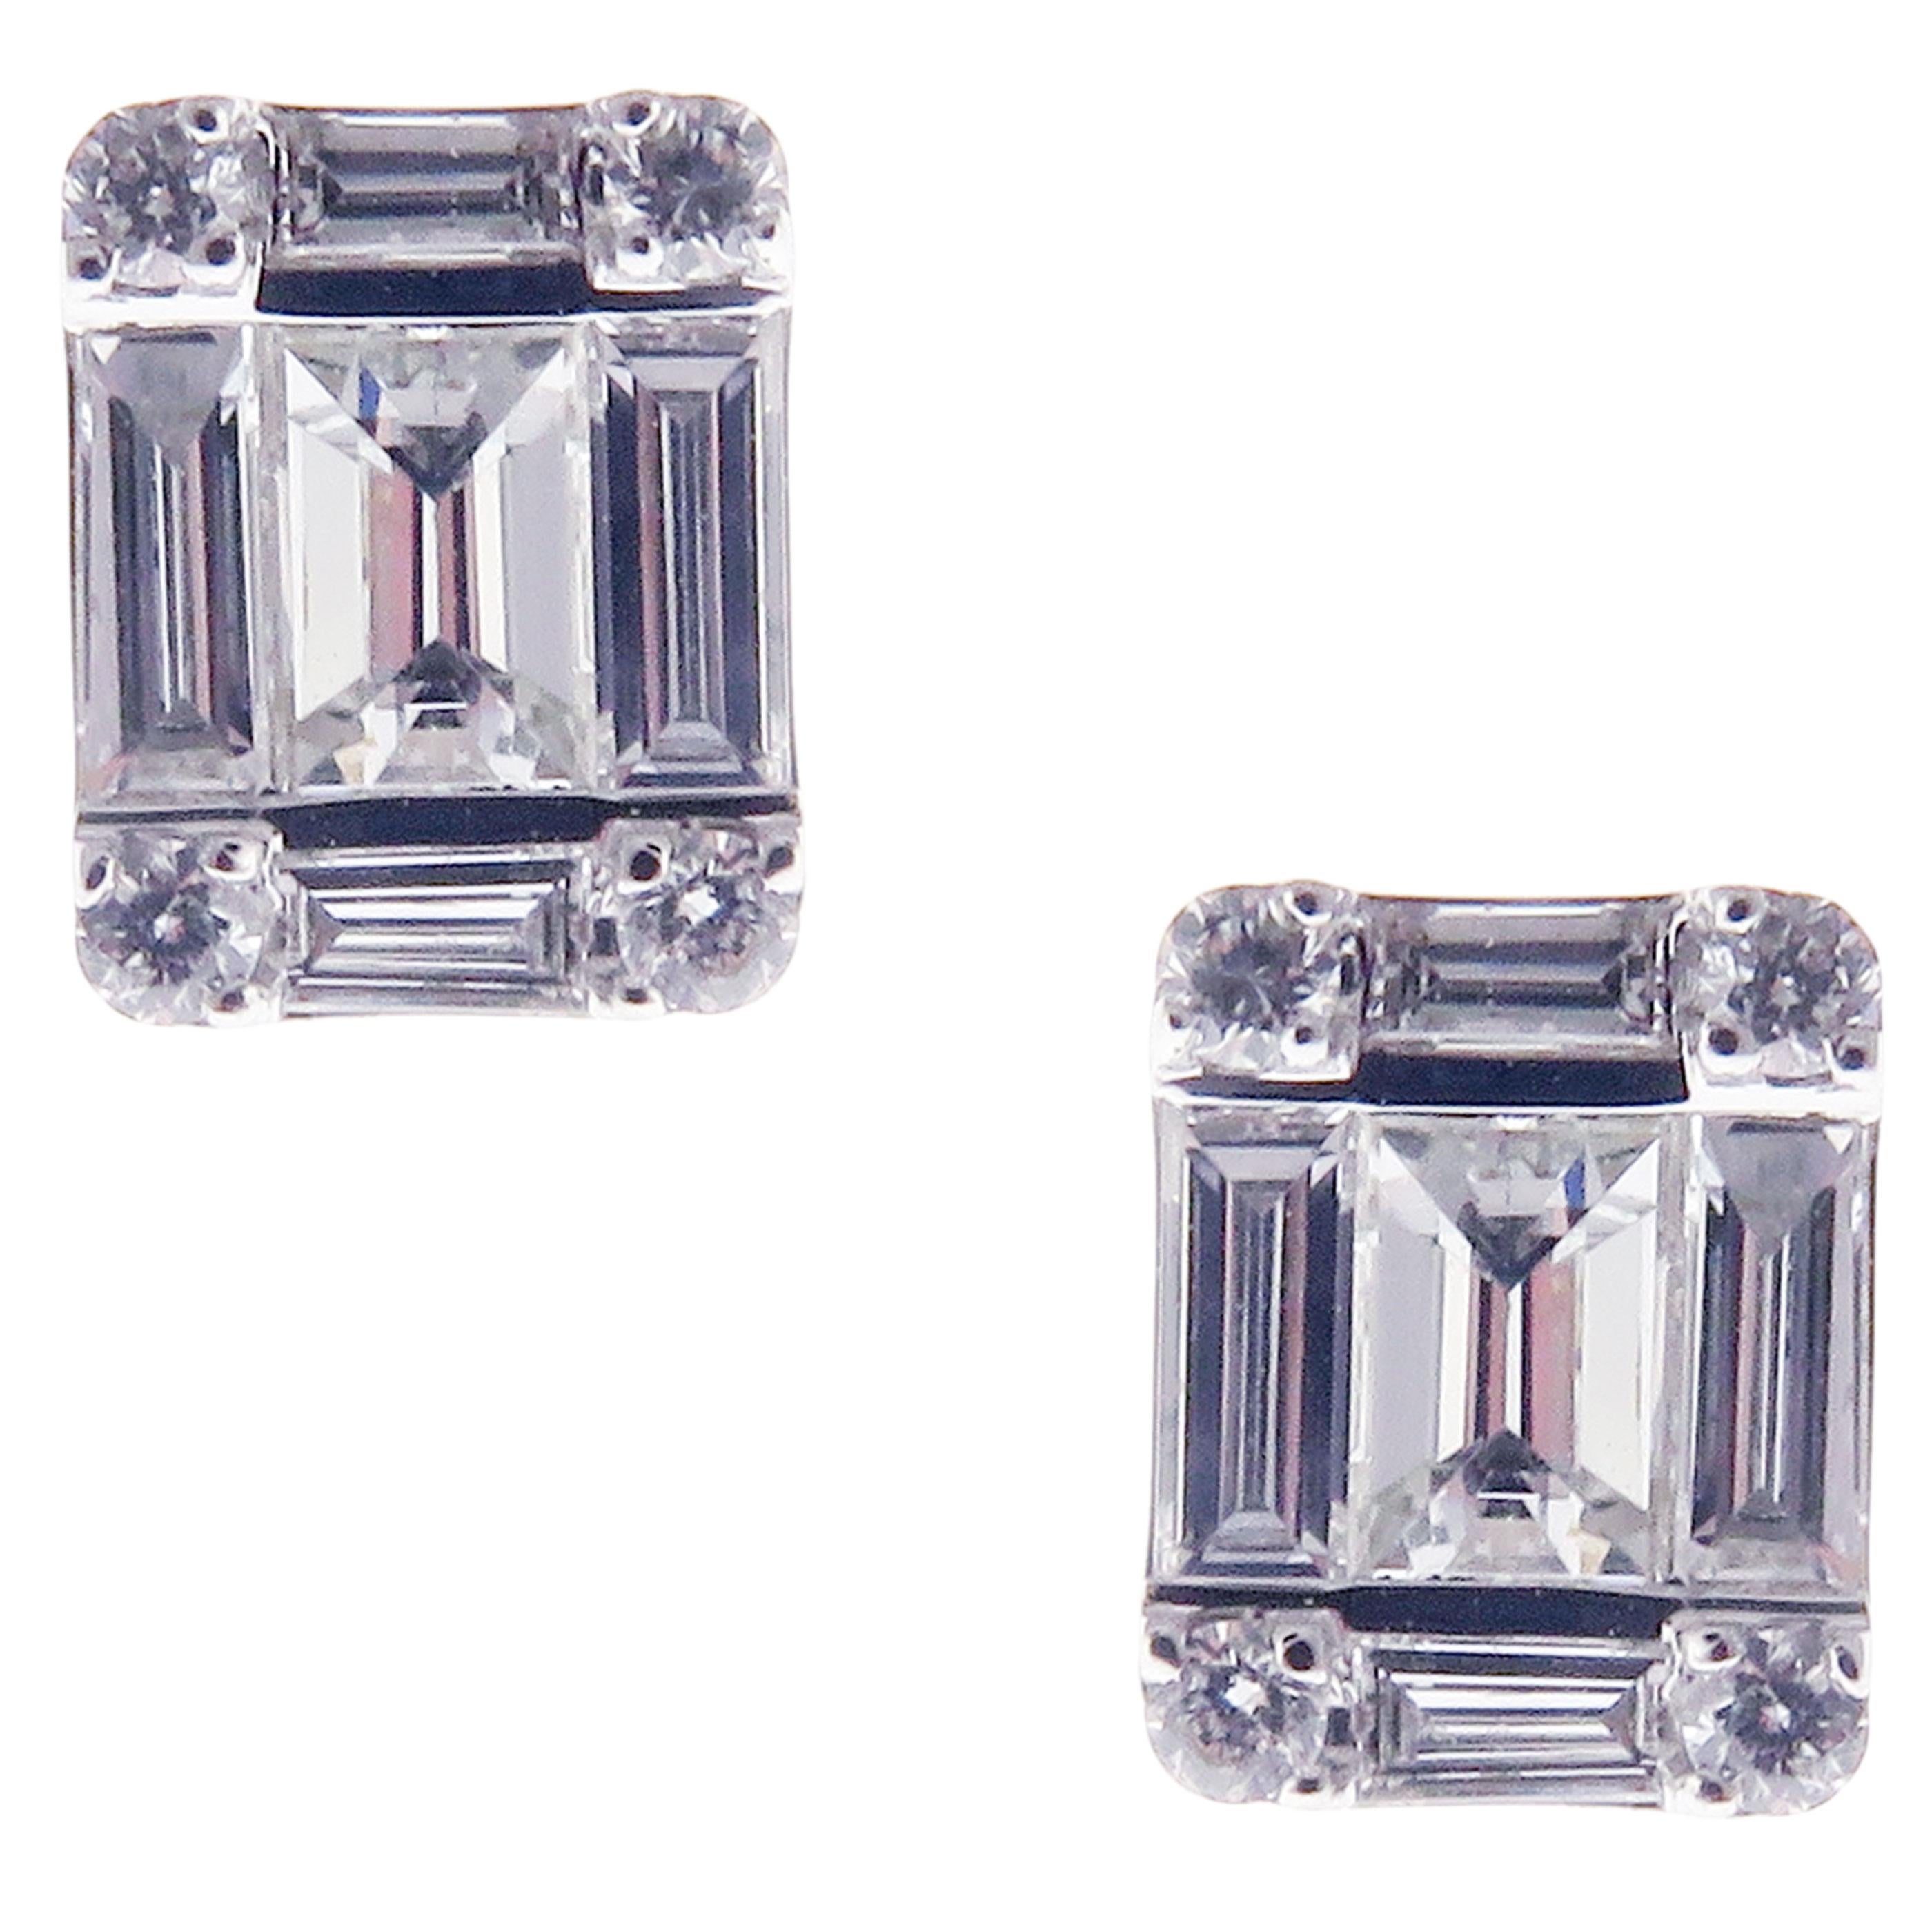 This round and baguette combination diamond illusion stud earring is crafted in 18-karat white gold, featuring 8 round white diamonds totaling of 0.05 carats and 10 baguette white diamonds totaling of 0.34 carats.
Approximate total weight 1.97